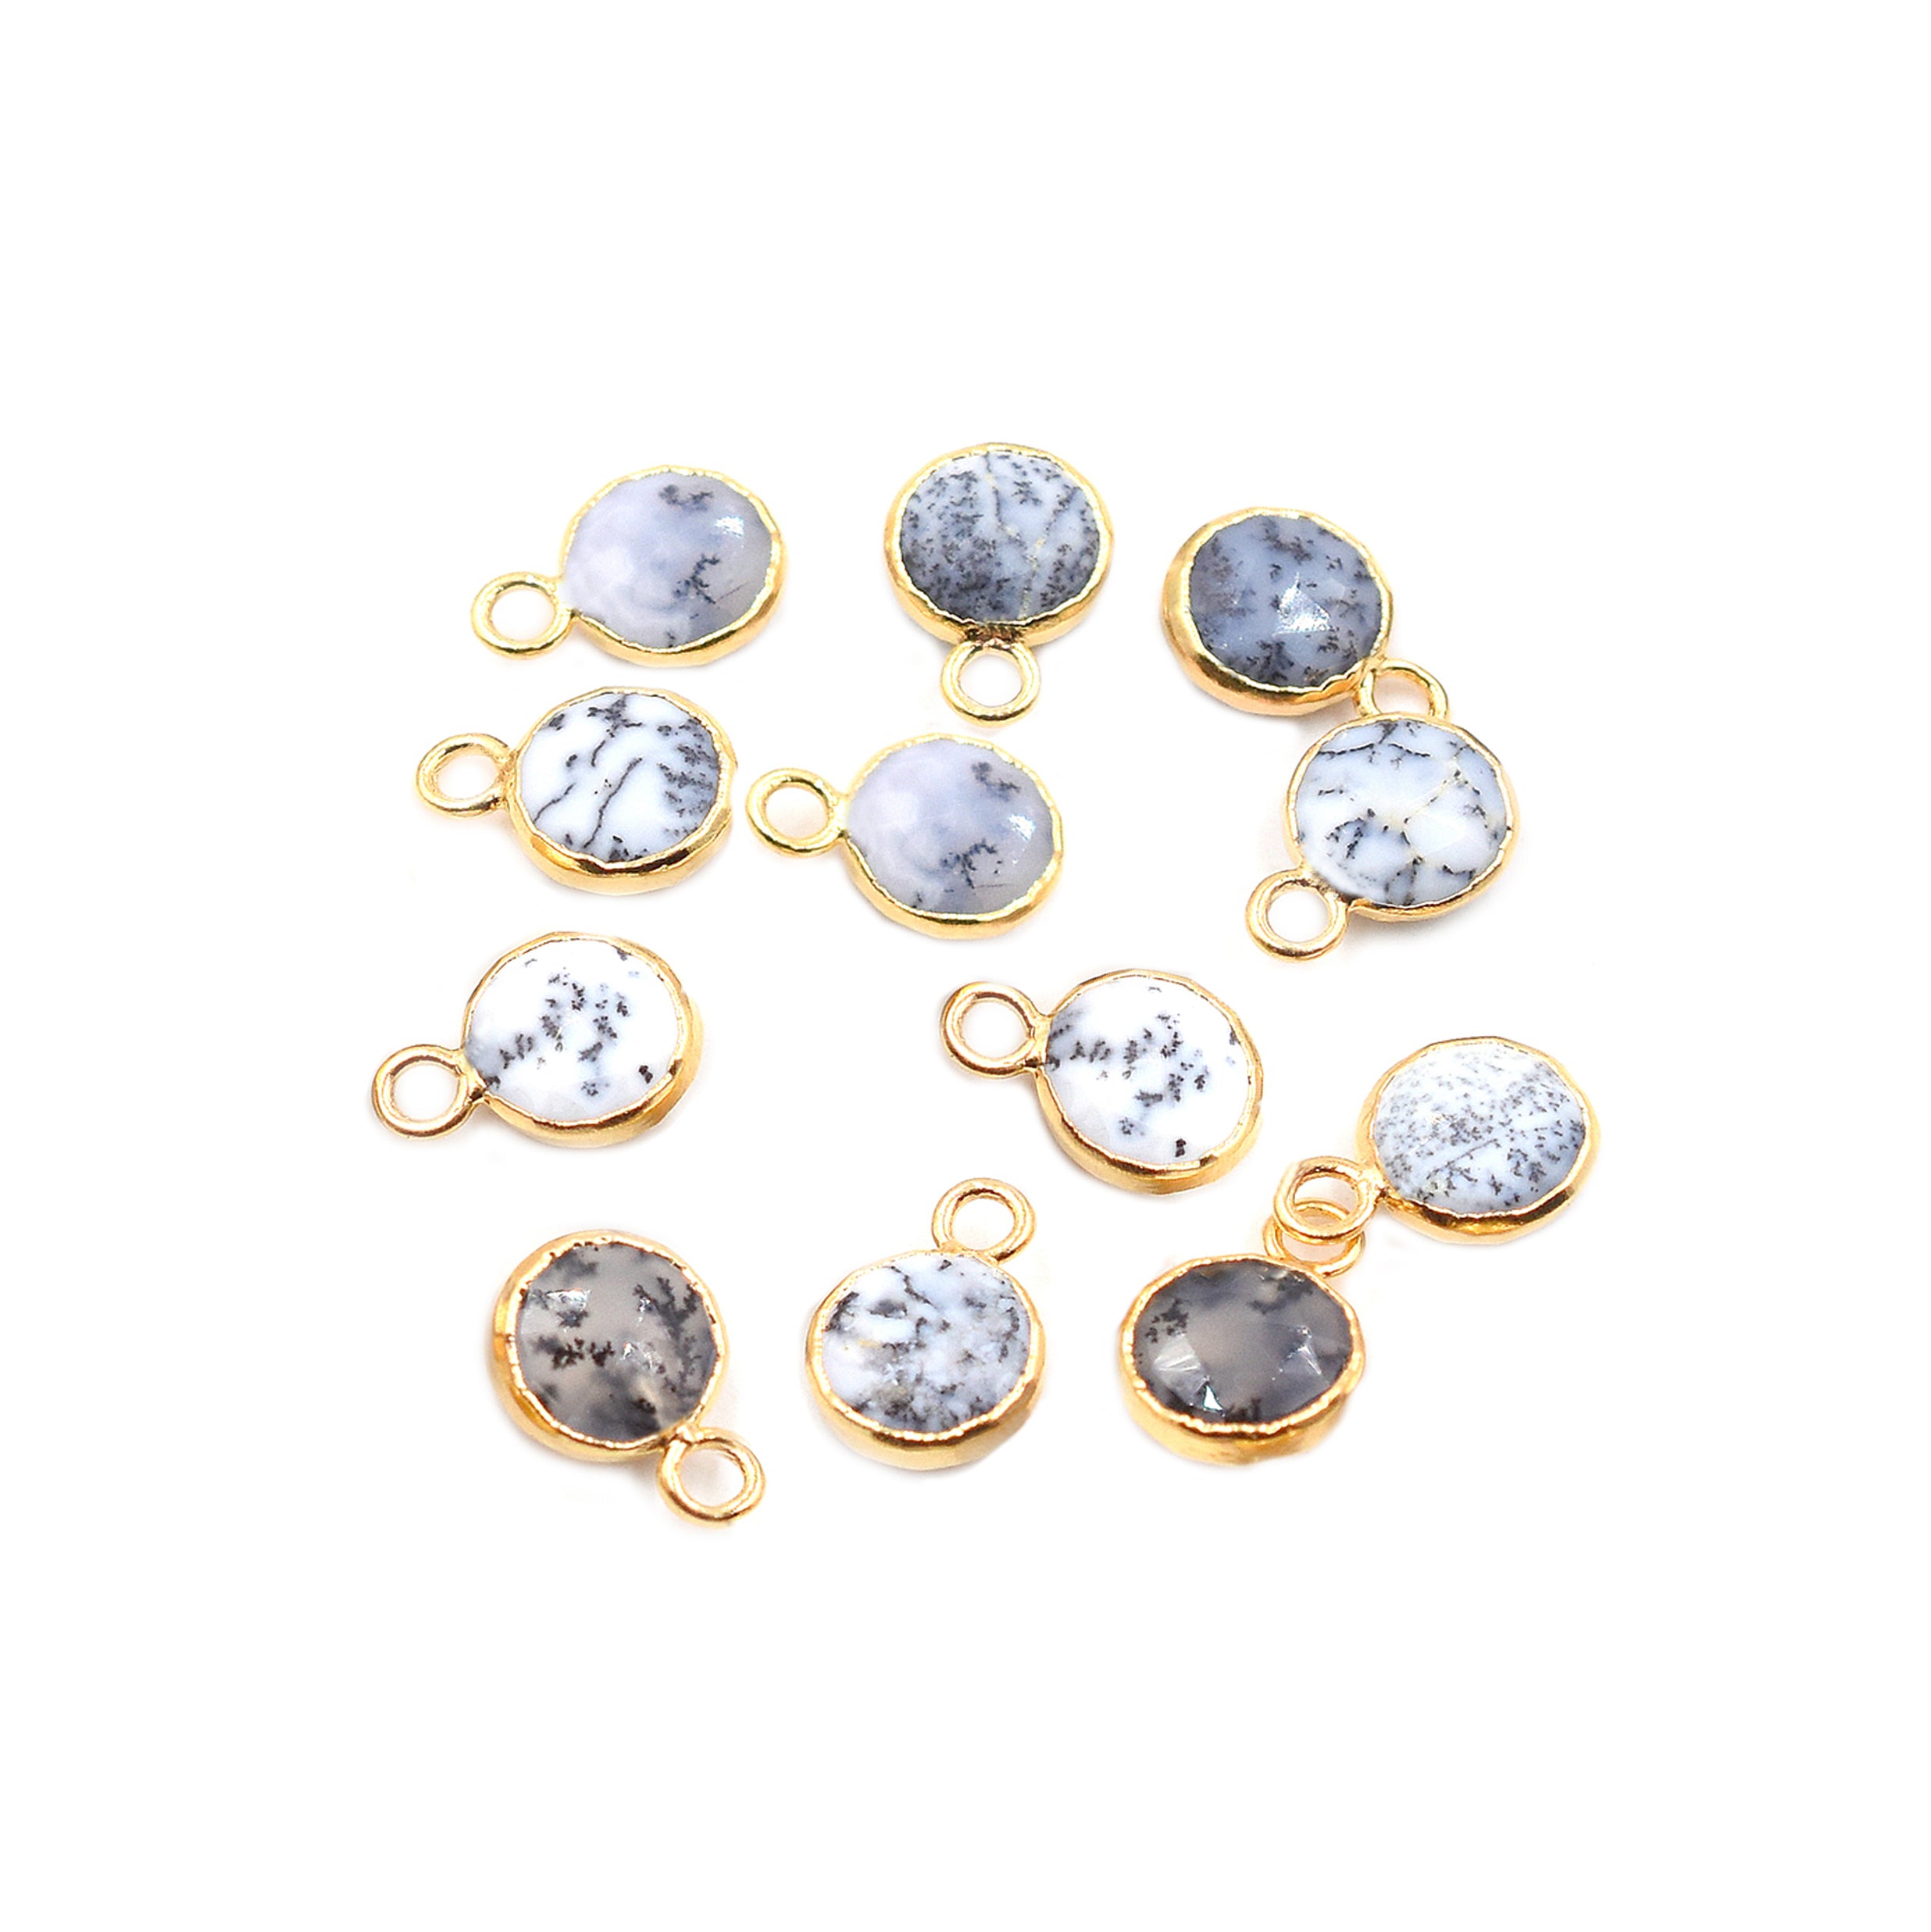 Dendritic Opal 6 To 7 MM Round Shape Gold Electroplated Pendant (Set Of 2 Pcs)